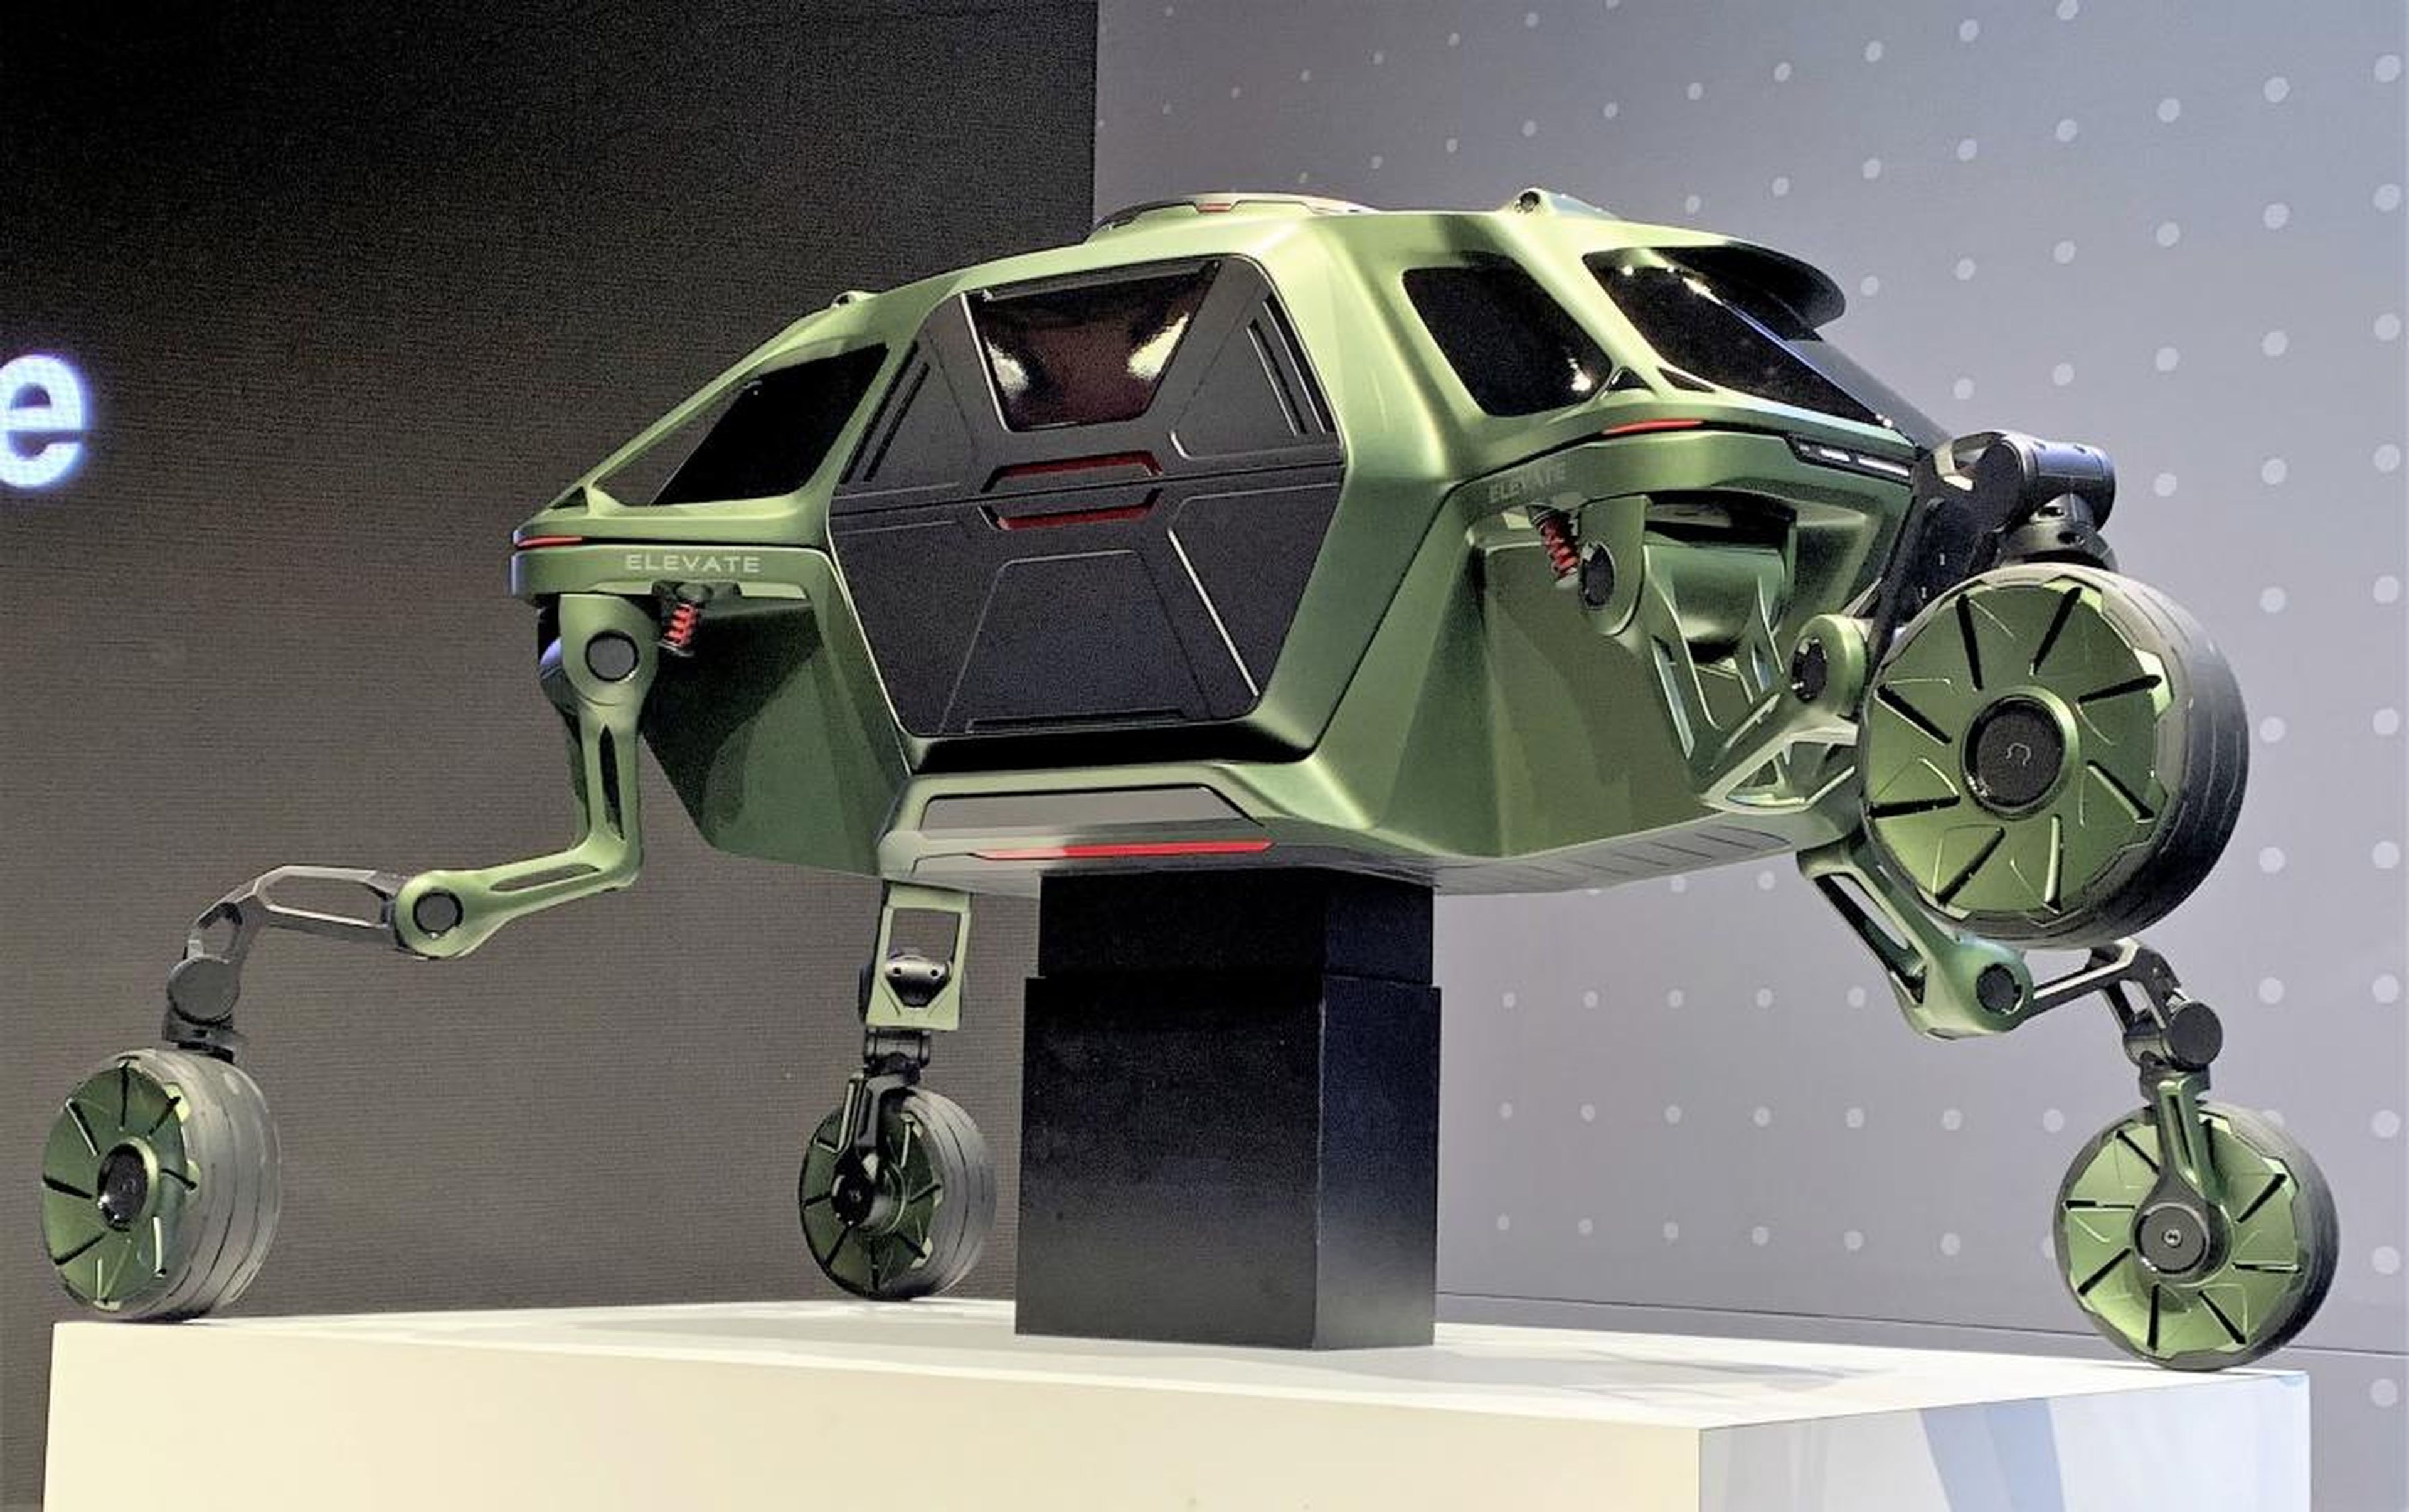 Hyundai showed off a concept car with foldable legs that allow it to navigate difficult terrain.